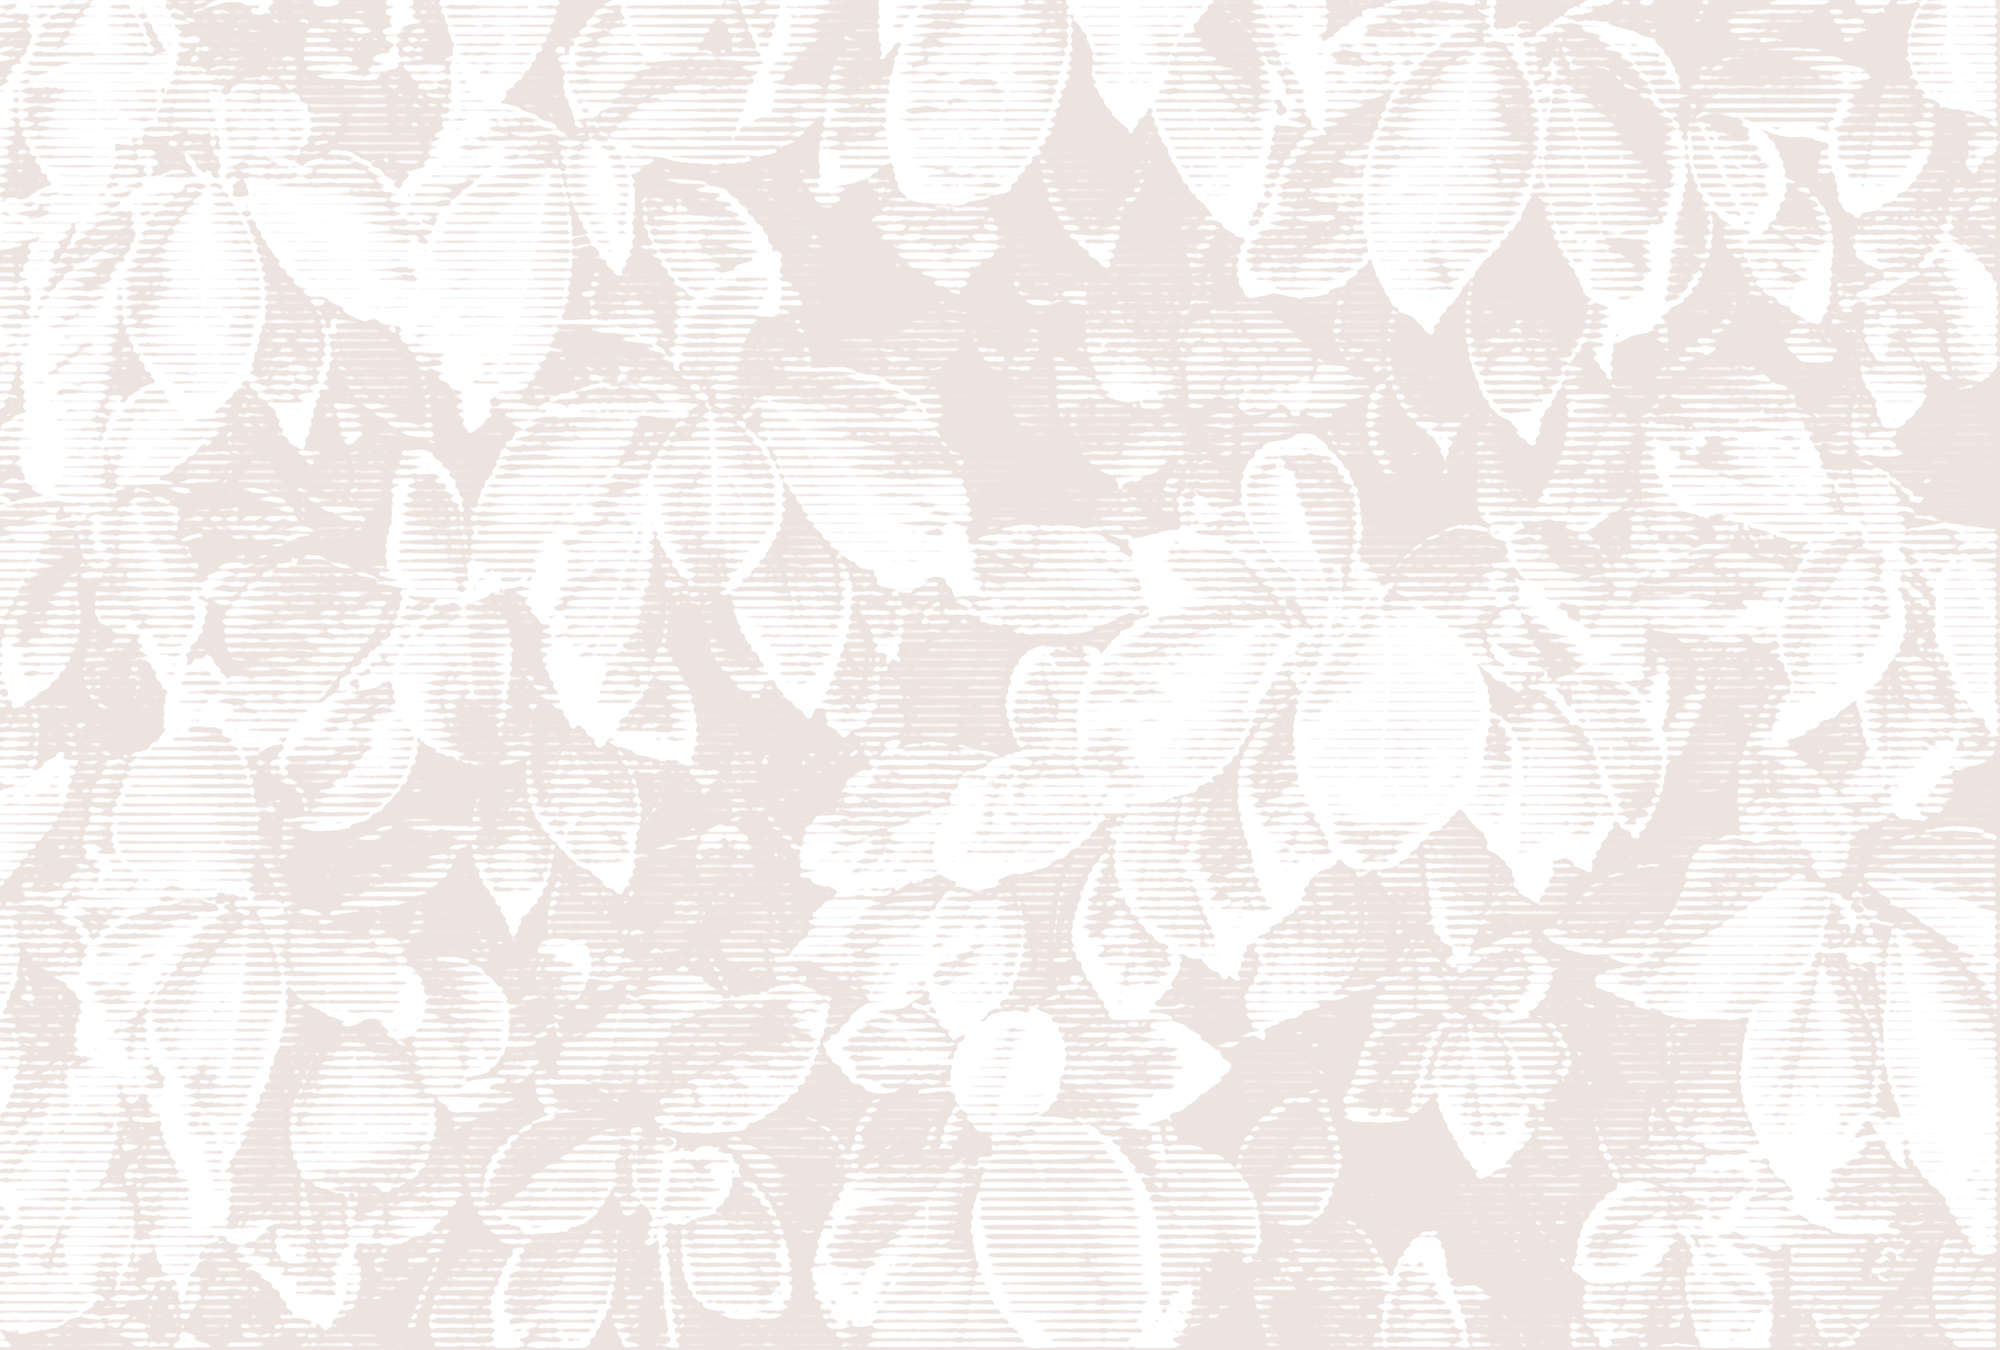             Shabby Chic Look Leaf Behang - Roze, Wit
        